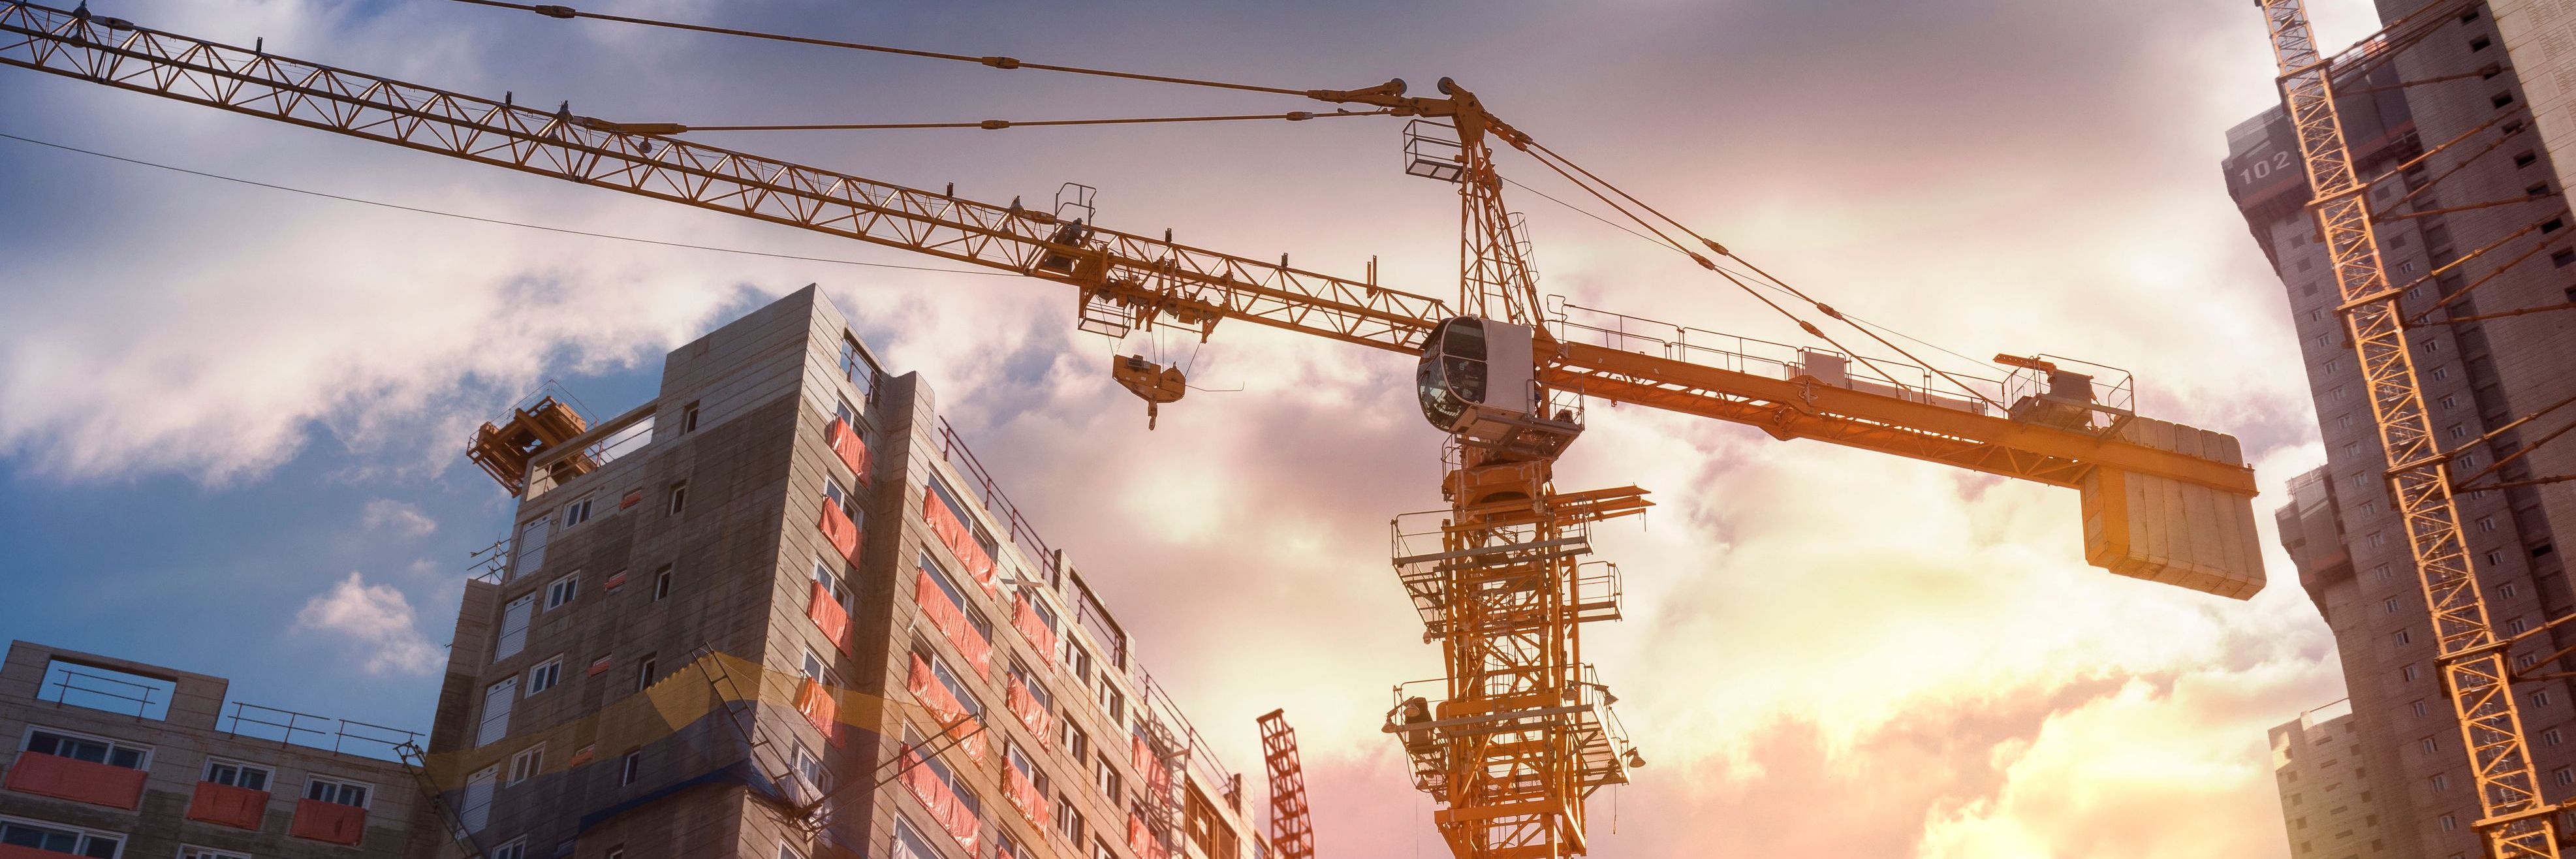 Capital Allowances for Construction & Property Expenditure - Practical Guidance & Update